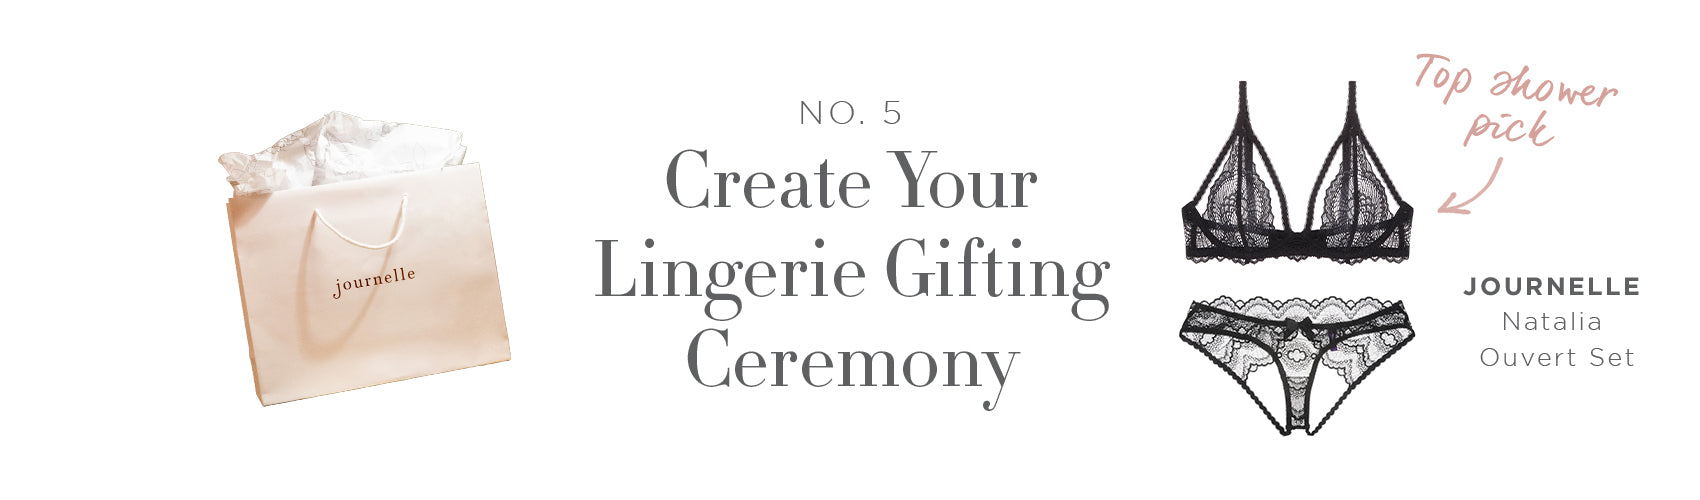 Create Your Lingerie Gifting Ceremony